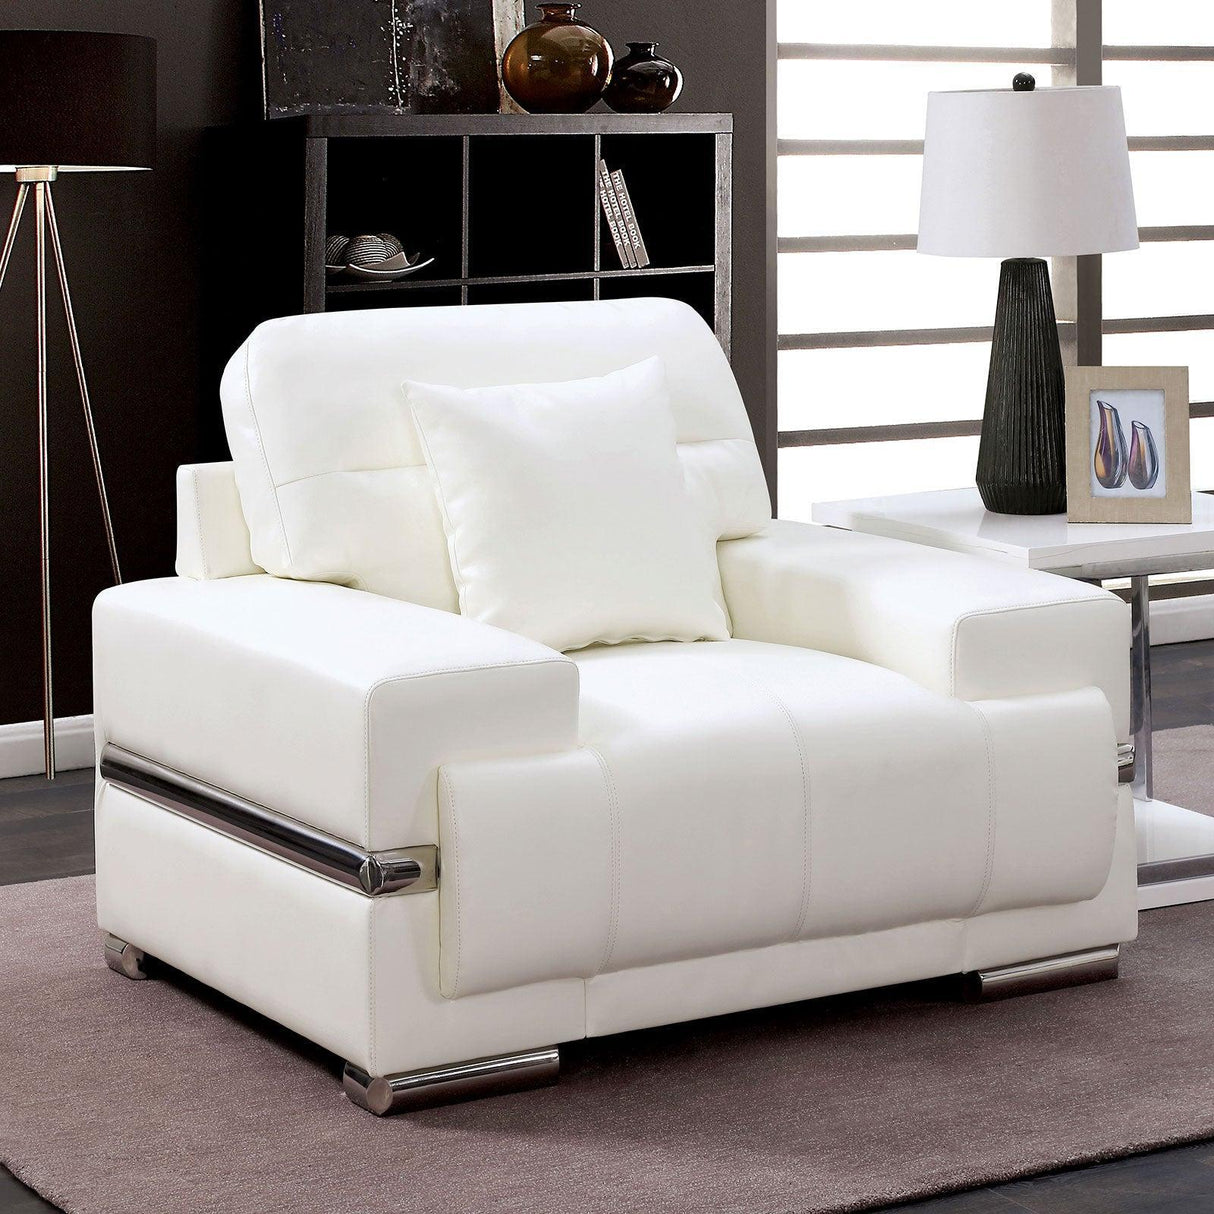 Zibak Contemporary White & Chrome Breathable Leatherette Living Room Set by Furniture of America Furniture of America